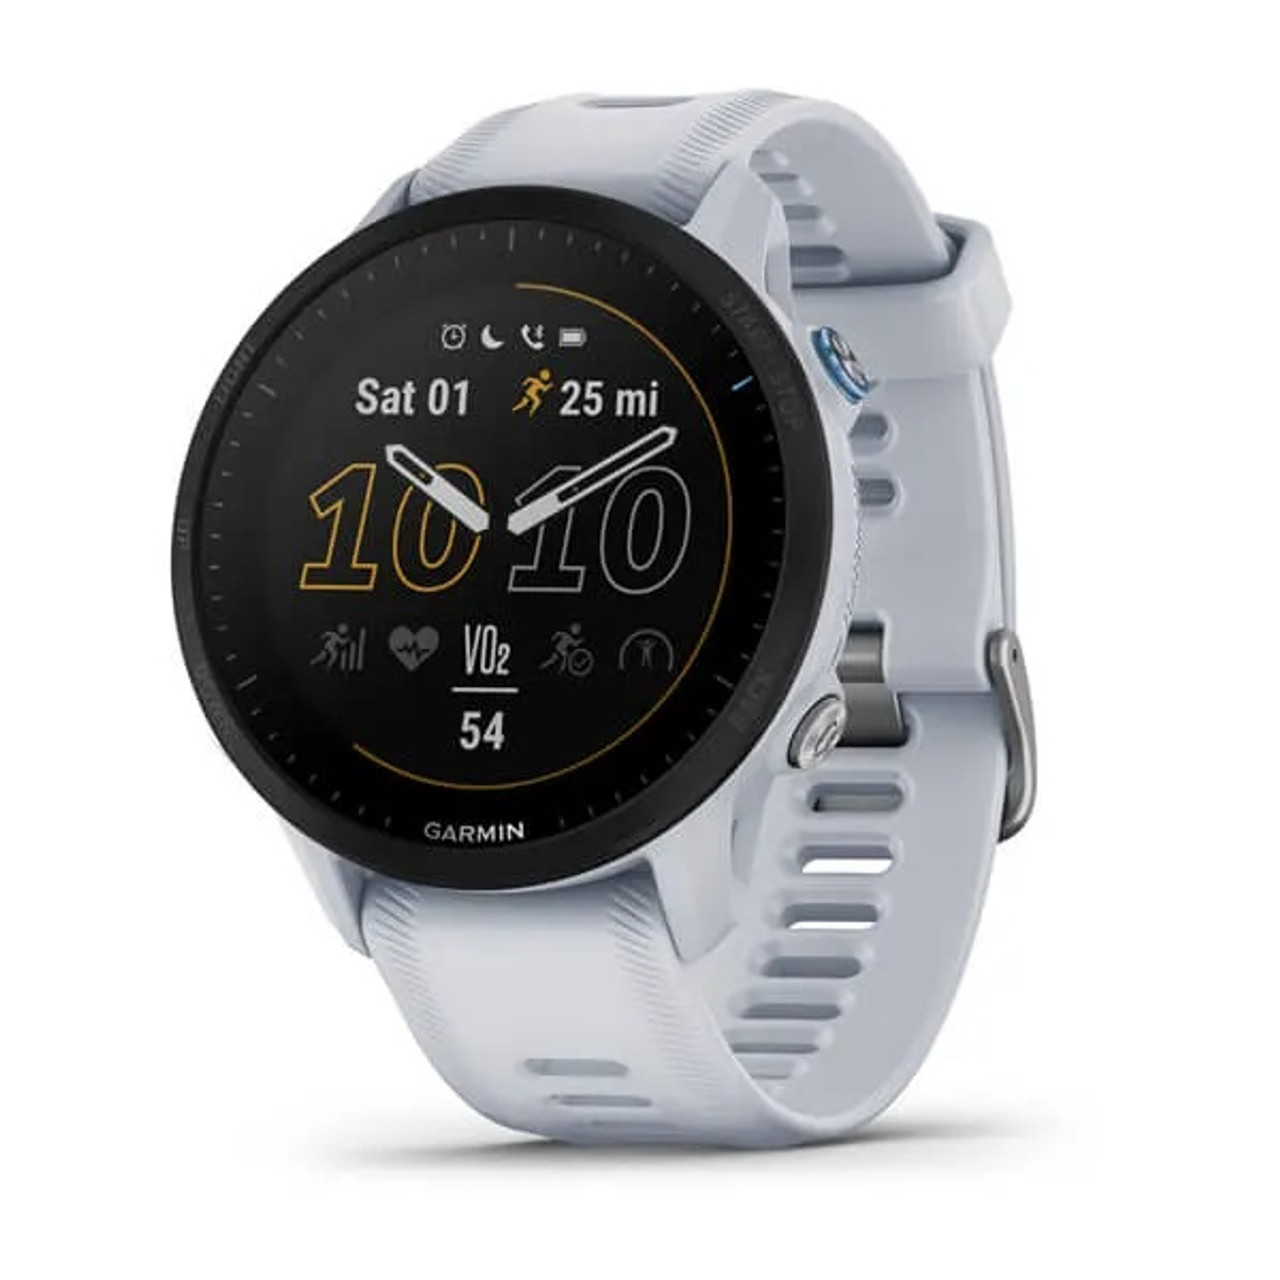 Garmin Forerunner 945 review: Music, mapping, payments, pulse, and incident  detection